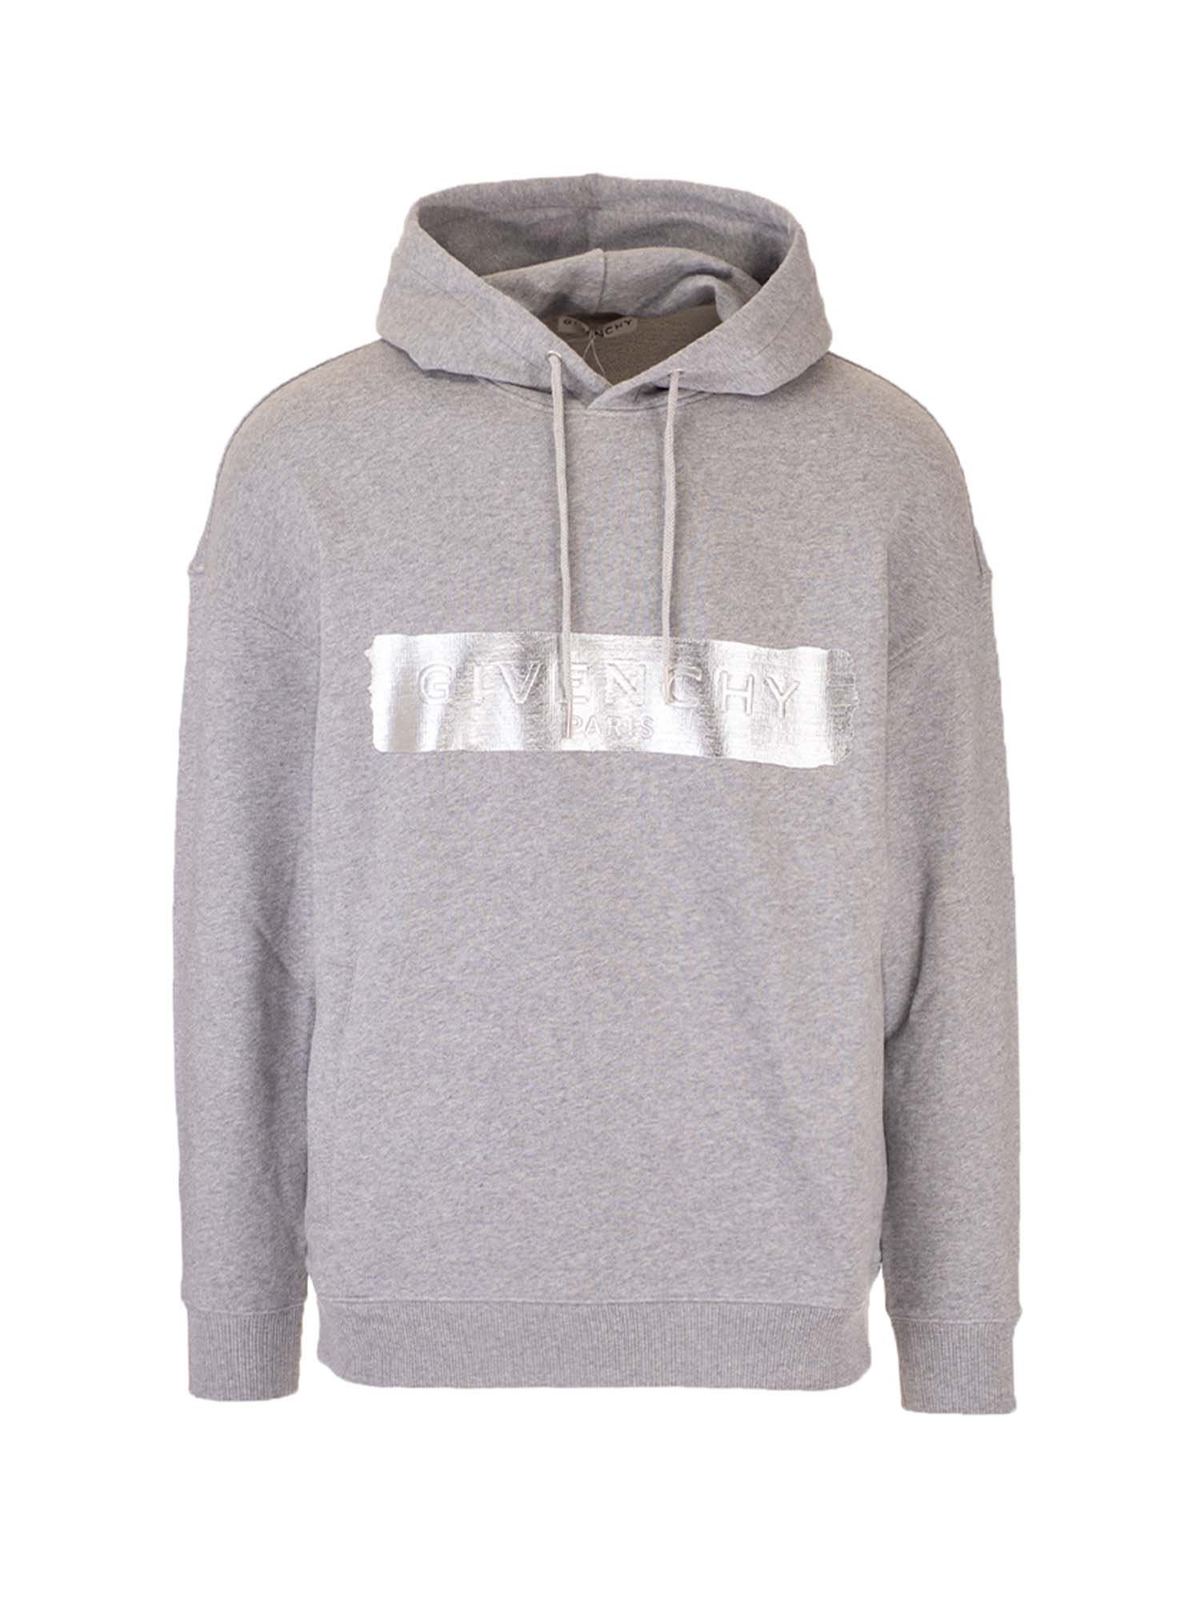 grey givenchy hoodie